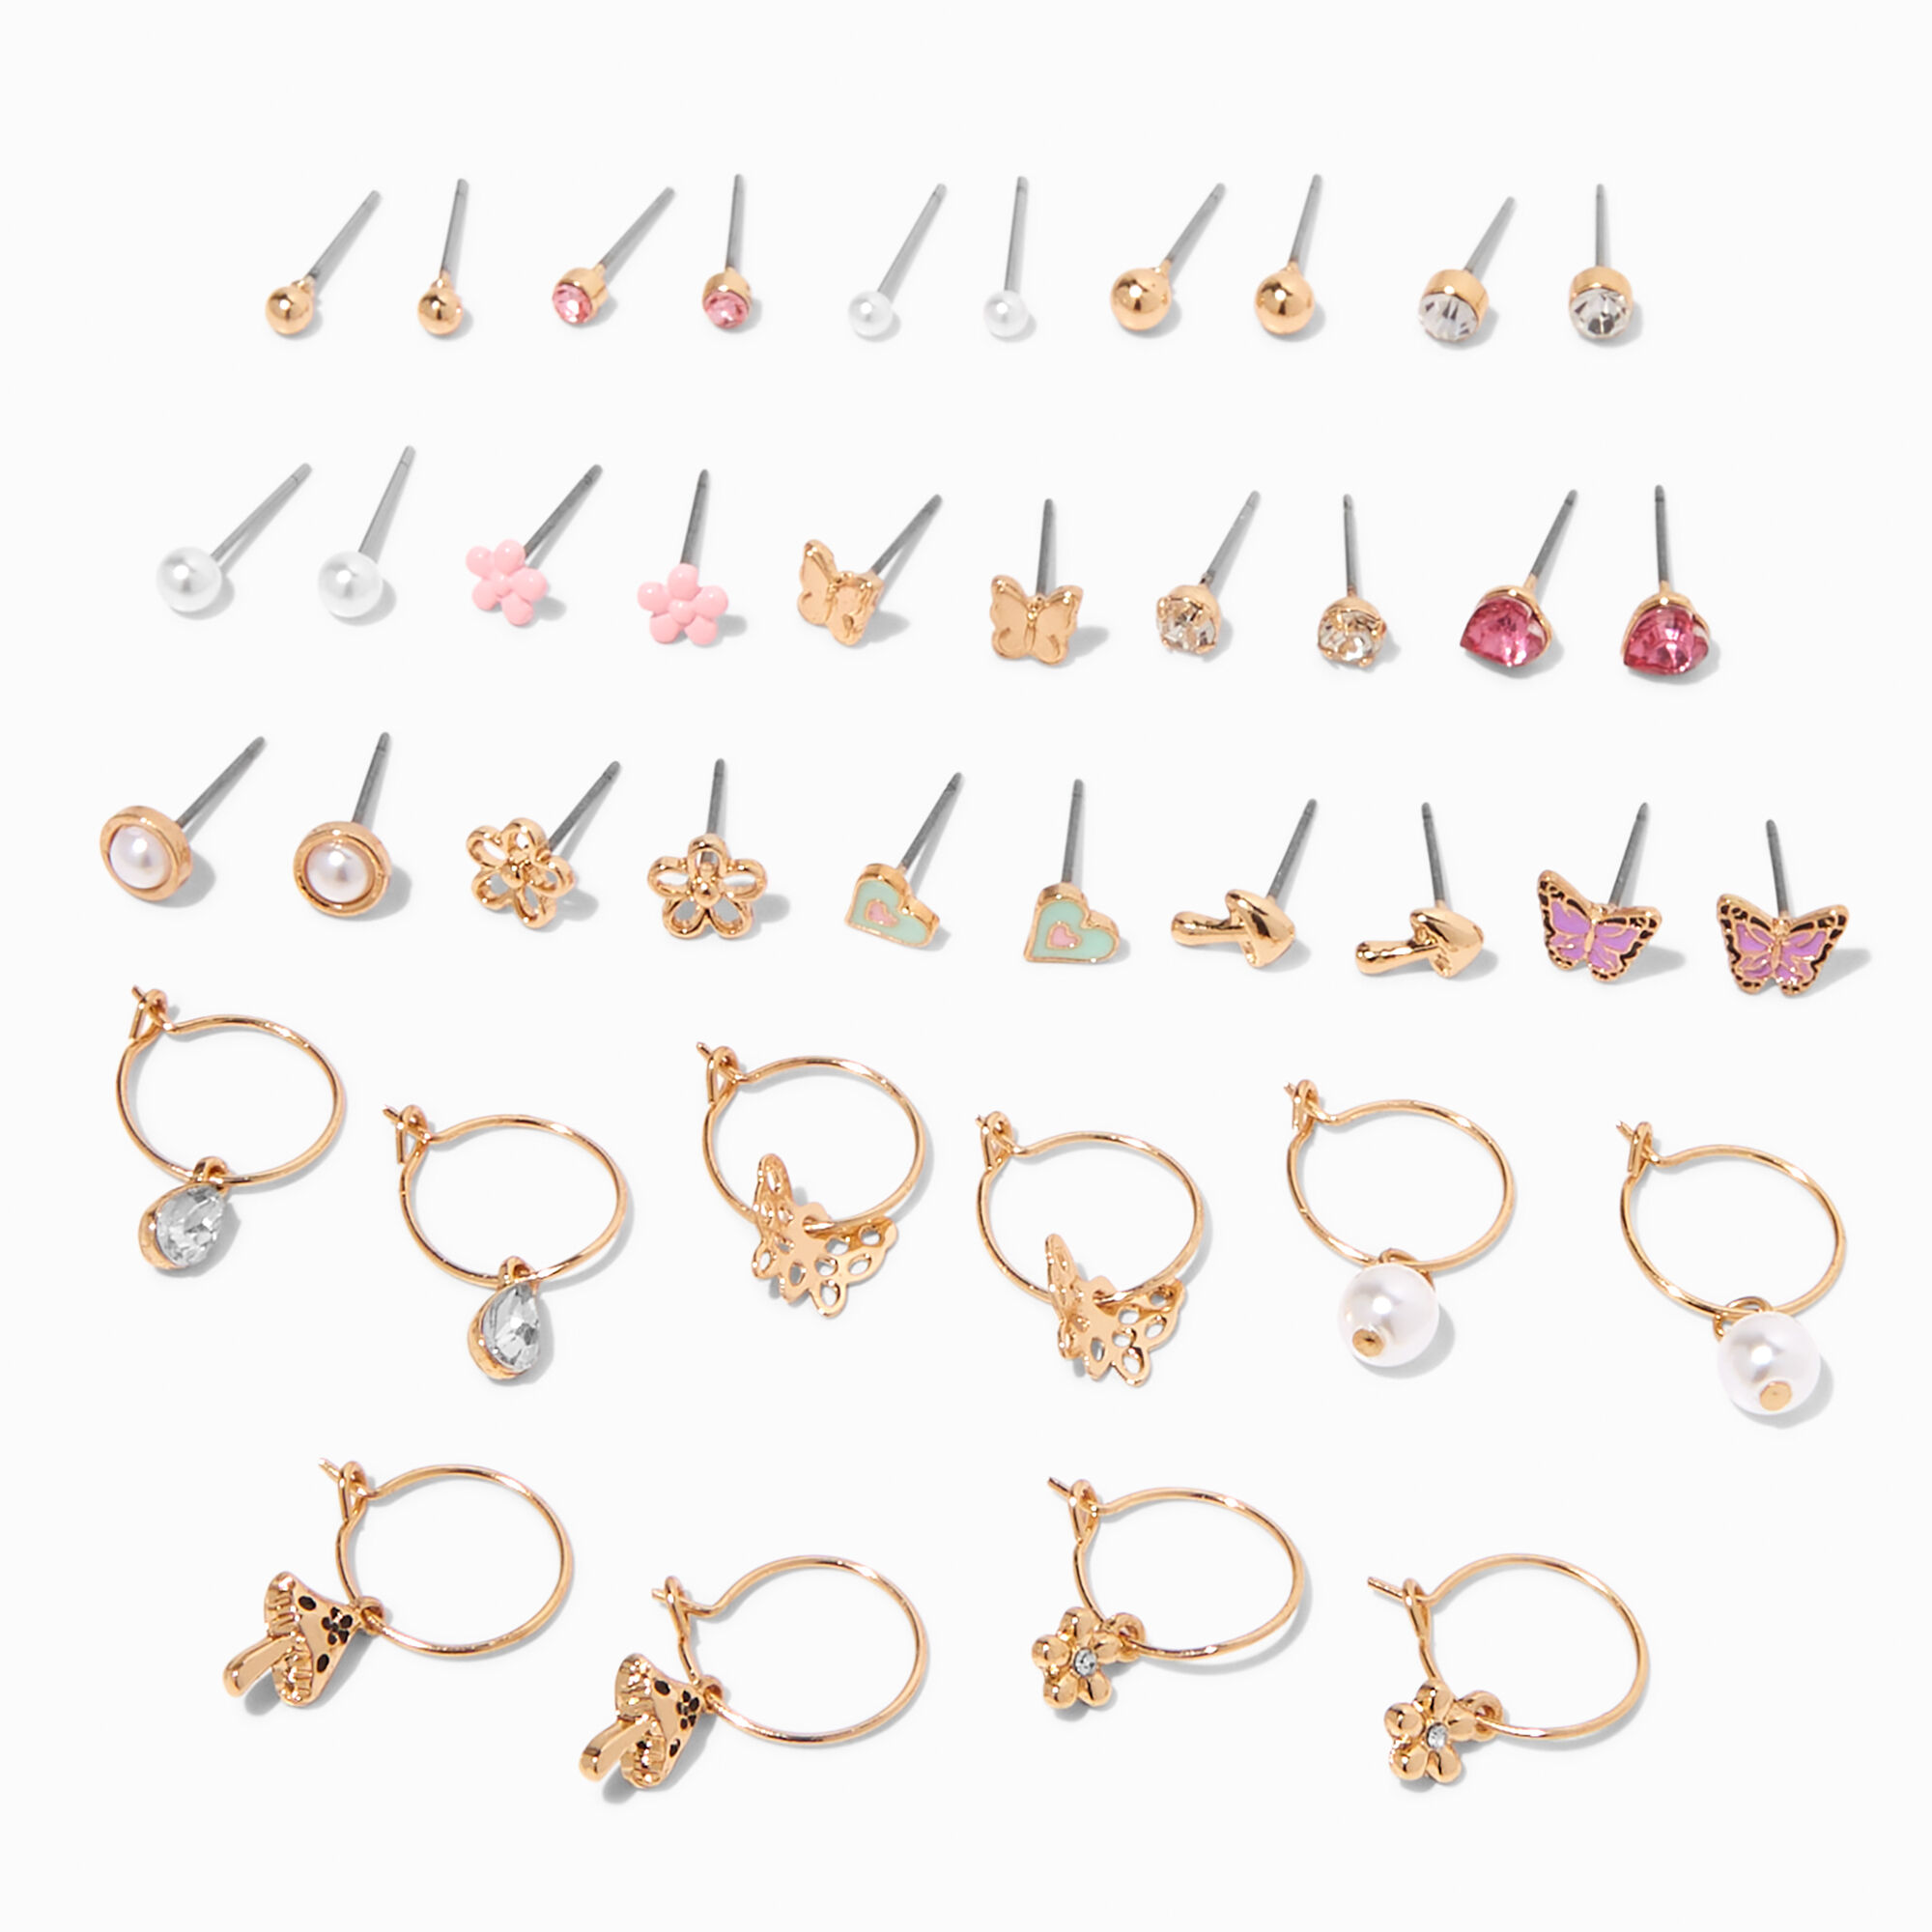 View Claires Pastel Tone Charm Earrings Set 20 Pack Gold information